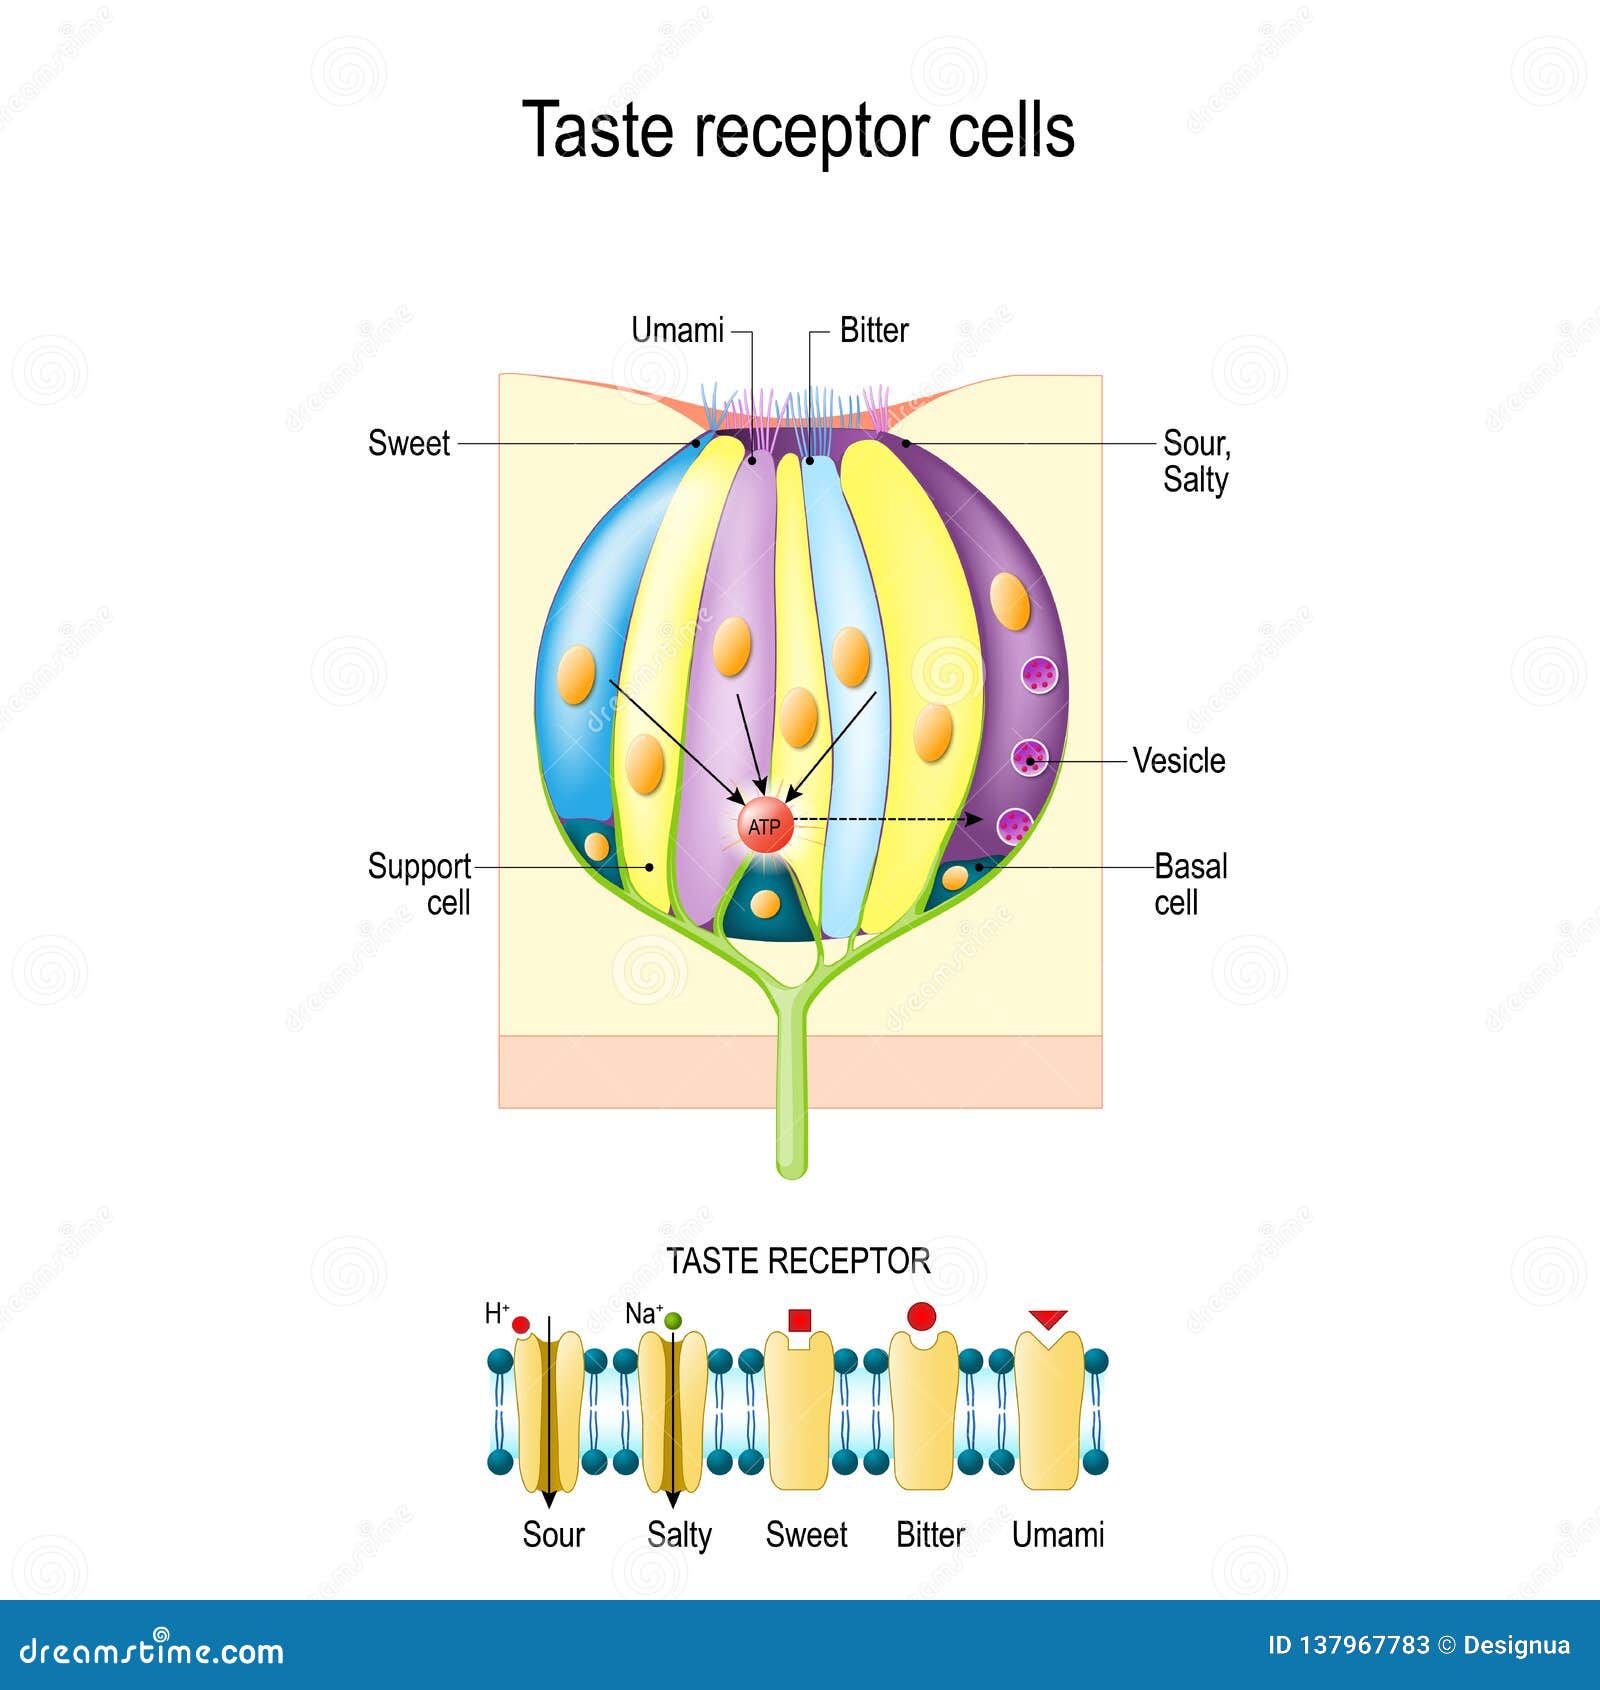 taste bud with receptor cells. types of taste receptors. cell membrane and ion channels for sour, salty, sweet, umami